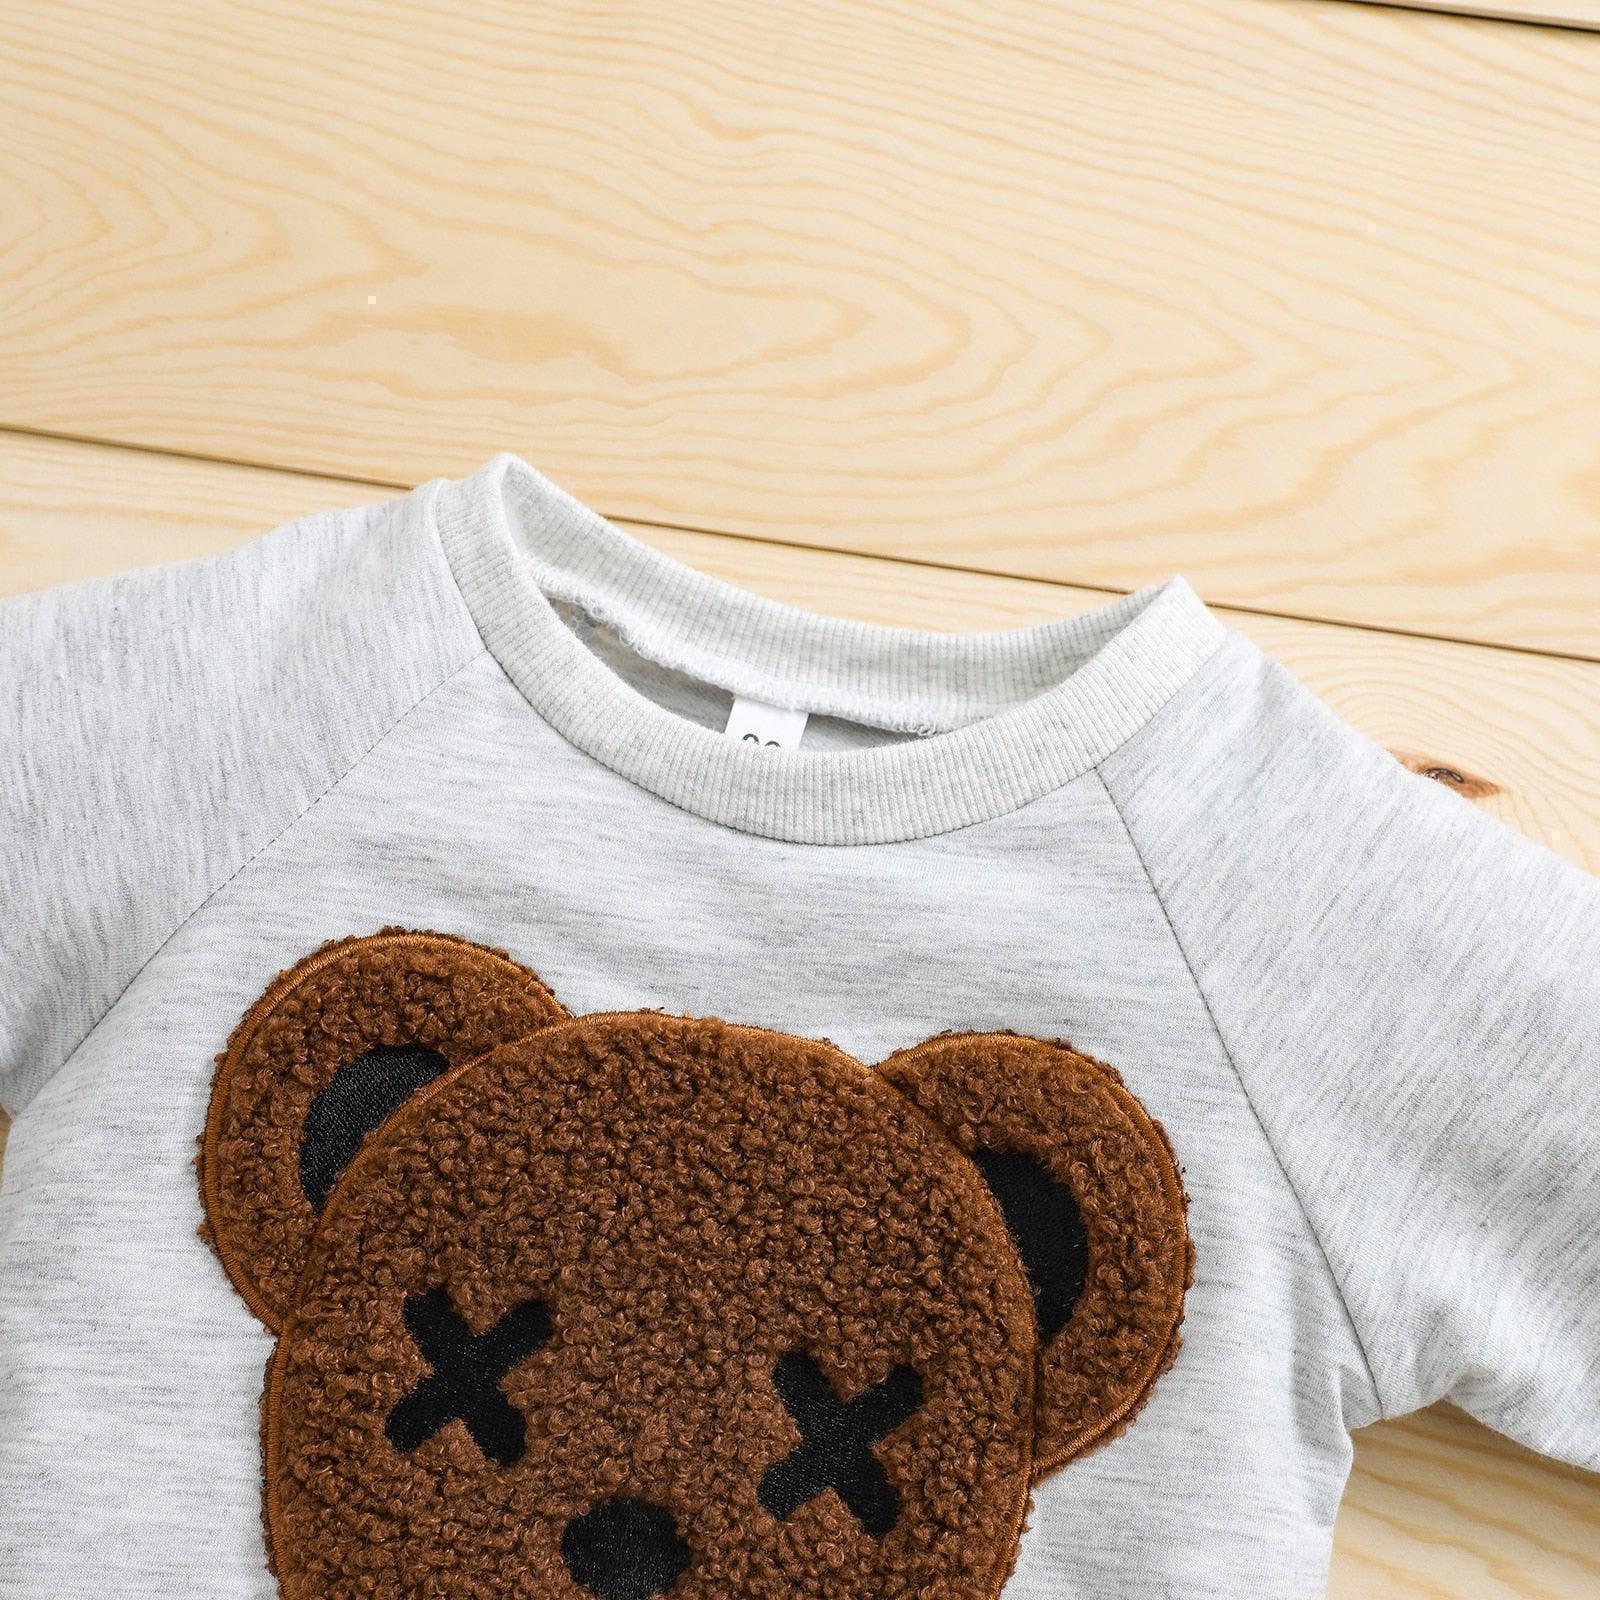 Fluffy Teddy Bear Outfit - Shop Baby Boutiques 